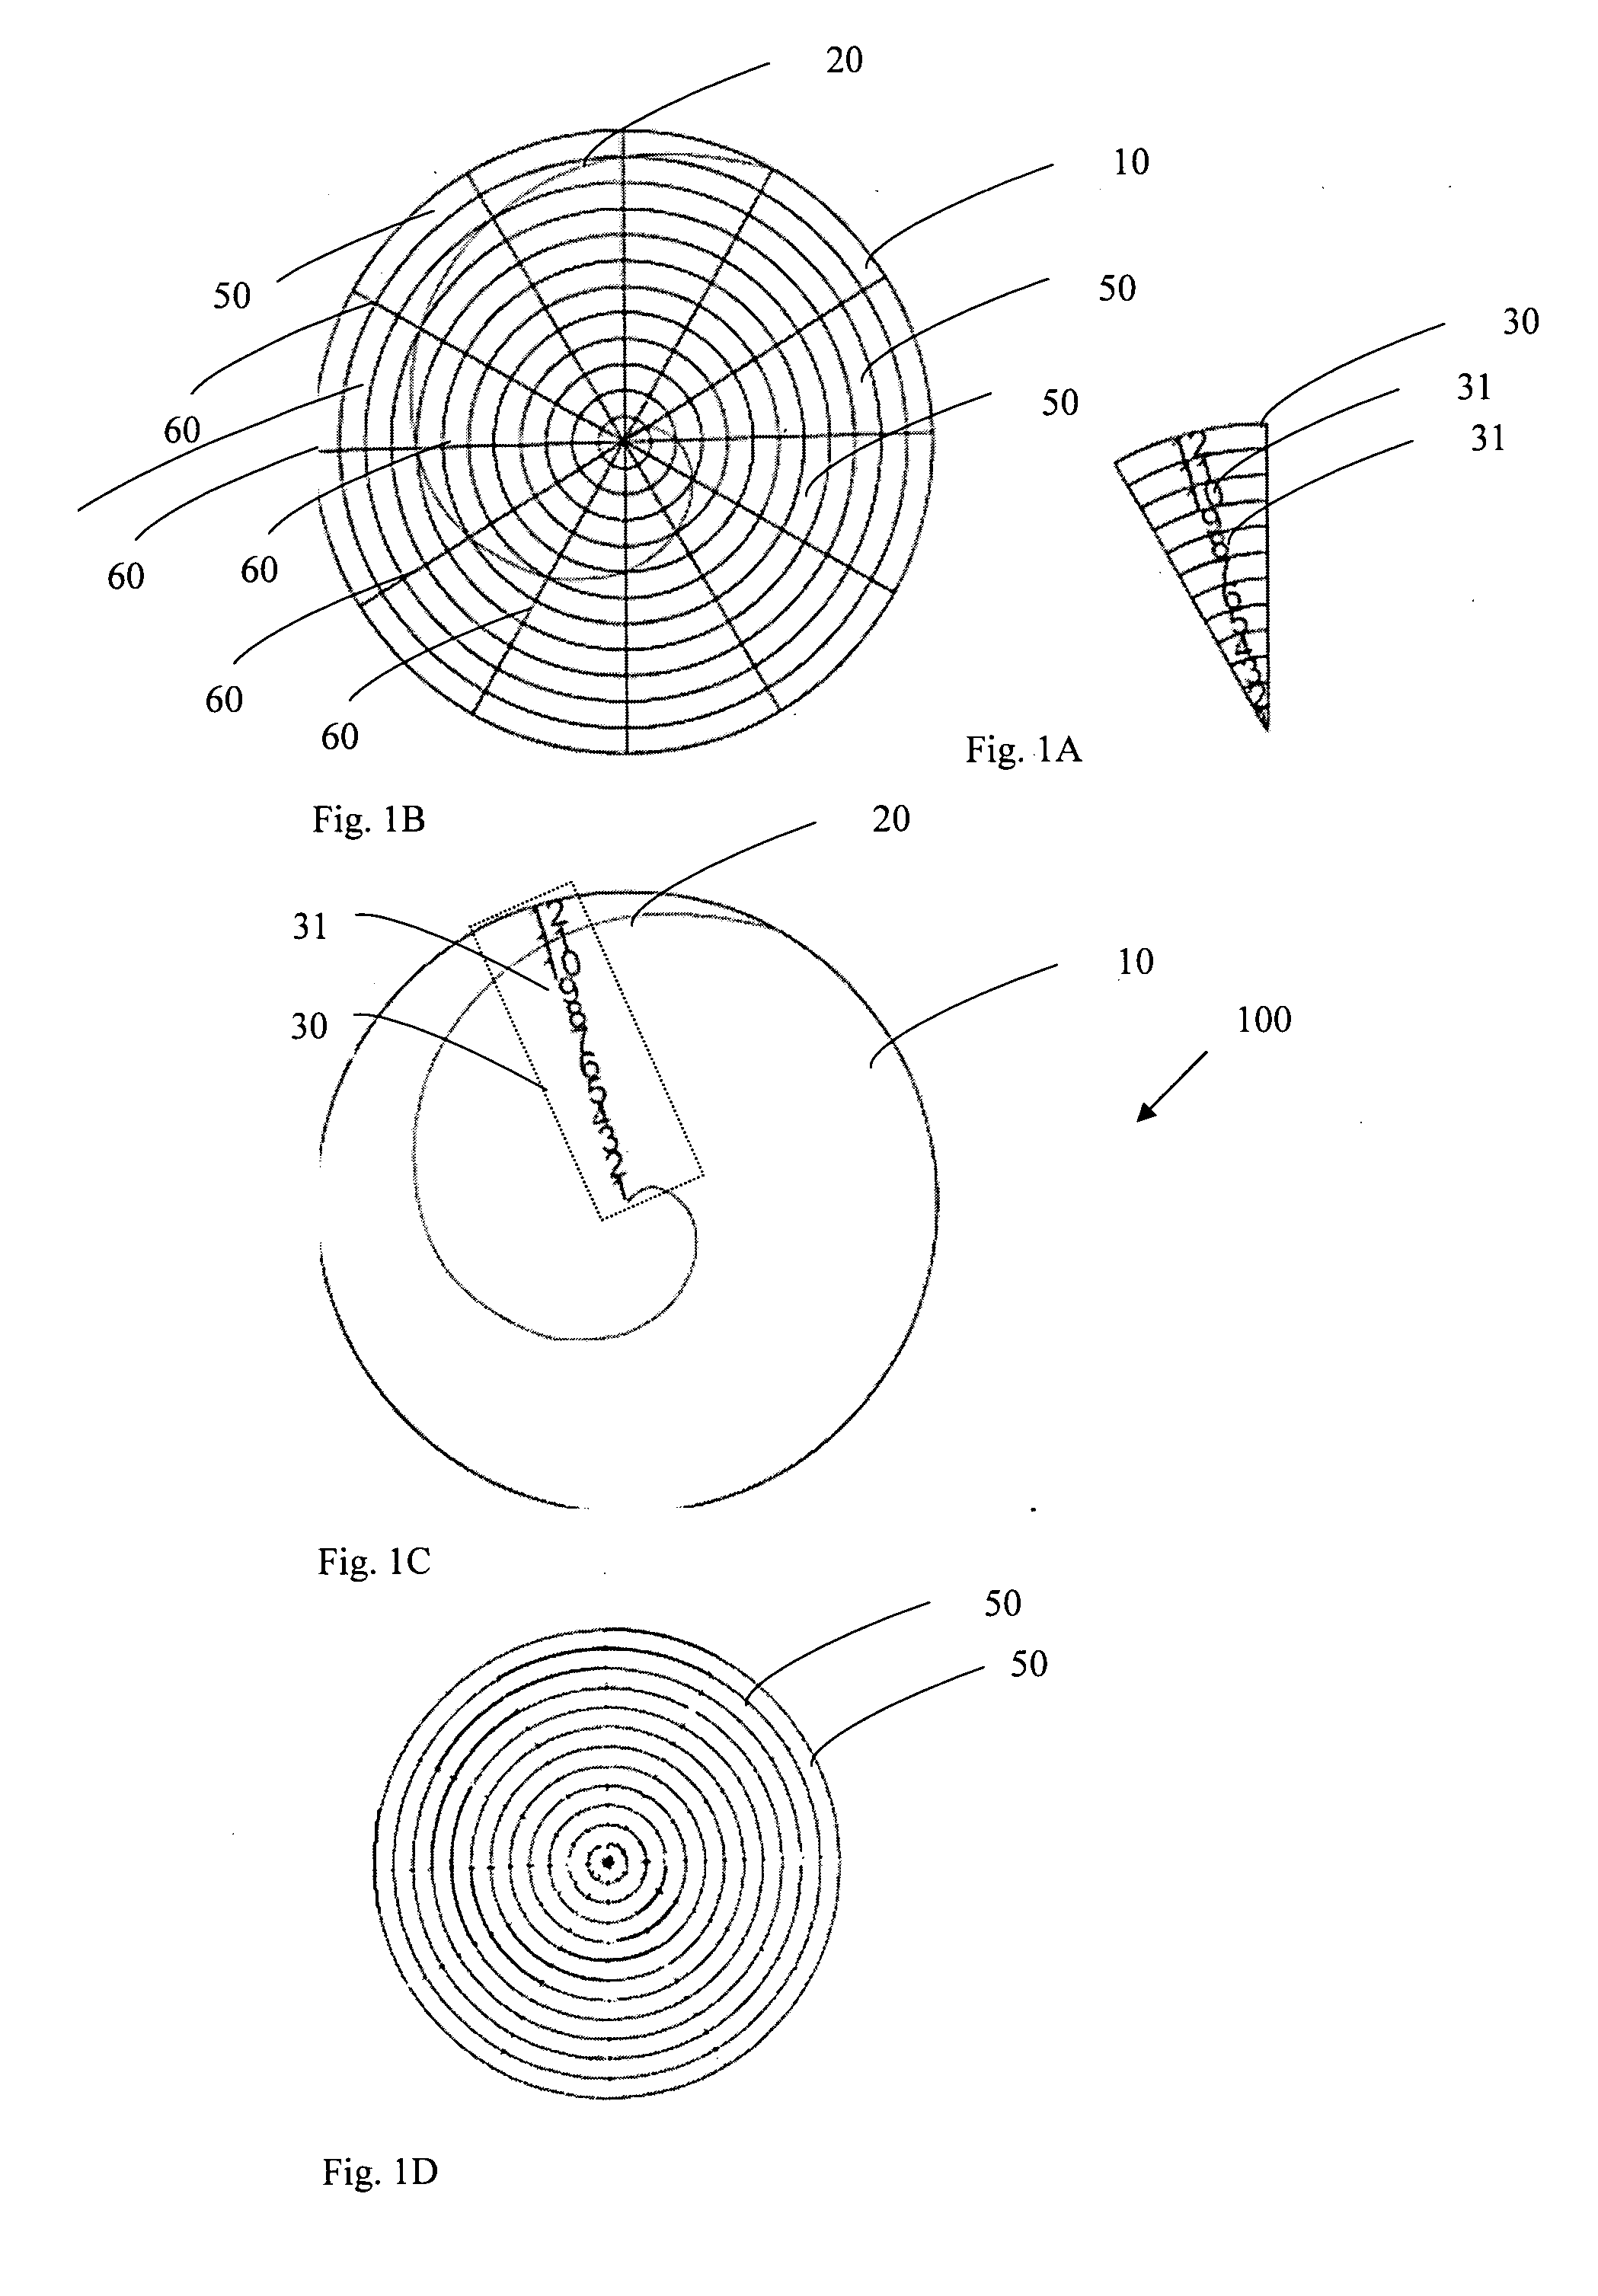 Means and method for calculating, measuring and displaying a measurable quantity